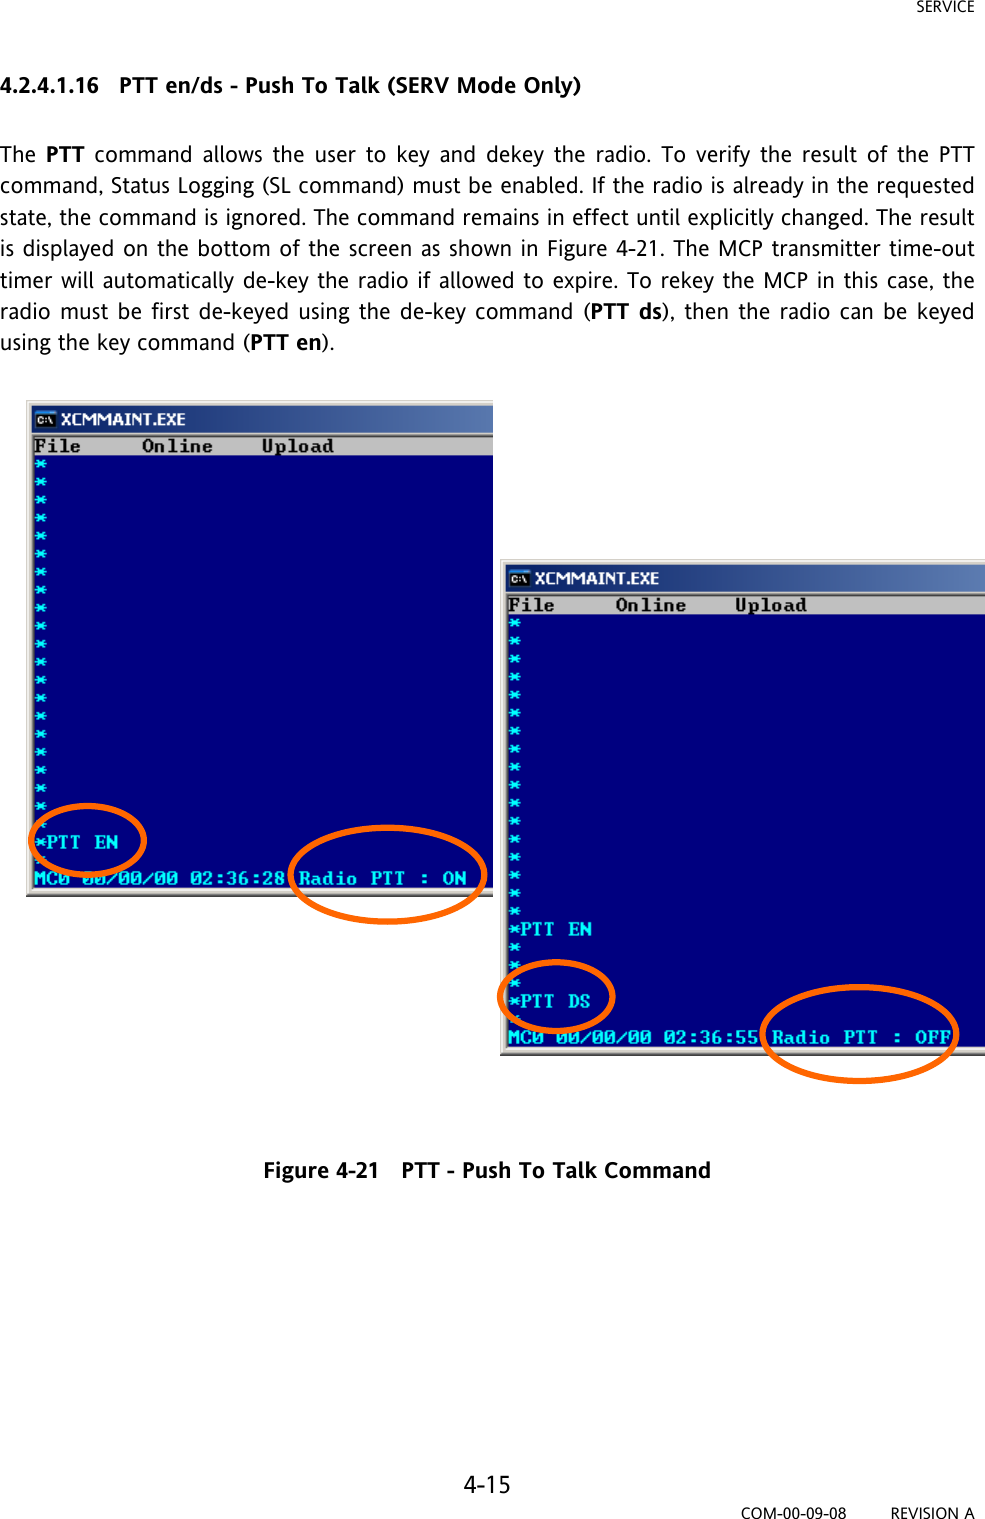 SERVICE 4-15 COM-00-09-08         REVISION A 4.2.4.1.16   PTT en/ds - Push To Talk (SERV Mode Only)  The  PTT command allows the user to key and dekey the radio. To verify the result of the PTT command, Status Logging (SL command) must be enabled. If the radio is already in the requested state, the command is ignored. The command remains in effect until explicitly changed. The result is displayed on the bottom of the screen as shown in Figure 4-21. The MCP transmitter time-out timer will automatically de-key the radio if allowed to expire. To rekey the MCP in this case, the radio must be first de-keyed using the de-key command (PTT ds), then the radio can be keyed using the key command (PTT en).                          Figure 4-21   PTT - Push To Talk Command         